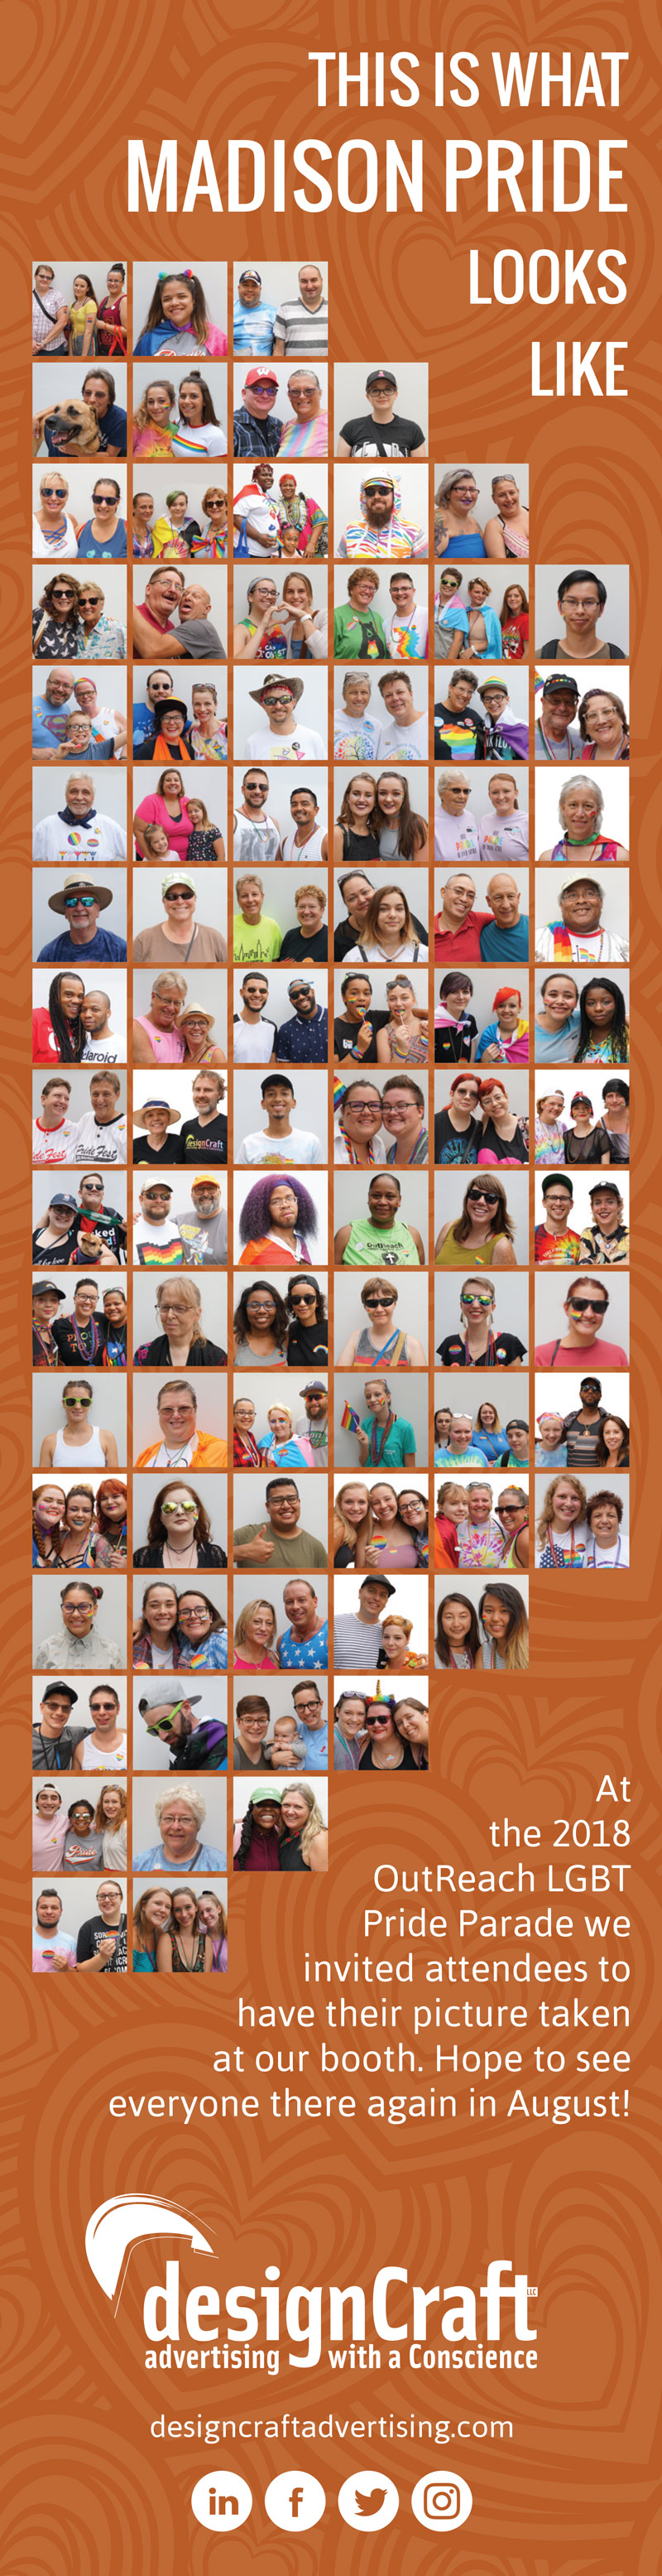 designCraft Advertising Pride ad. Ad text: This is what Madison pride looks like. At the 2018 OutReach LGBT Pride Parade we invited attendees to have their picture taken at our booth. Hope to see everyone there again in August!